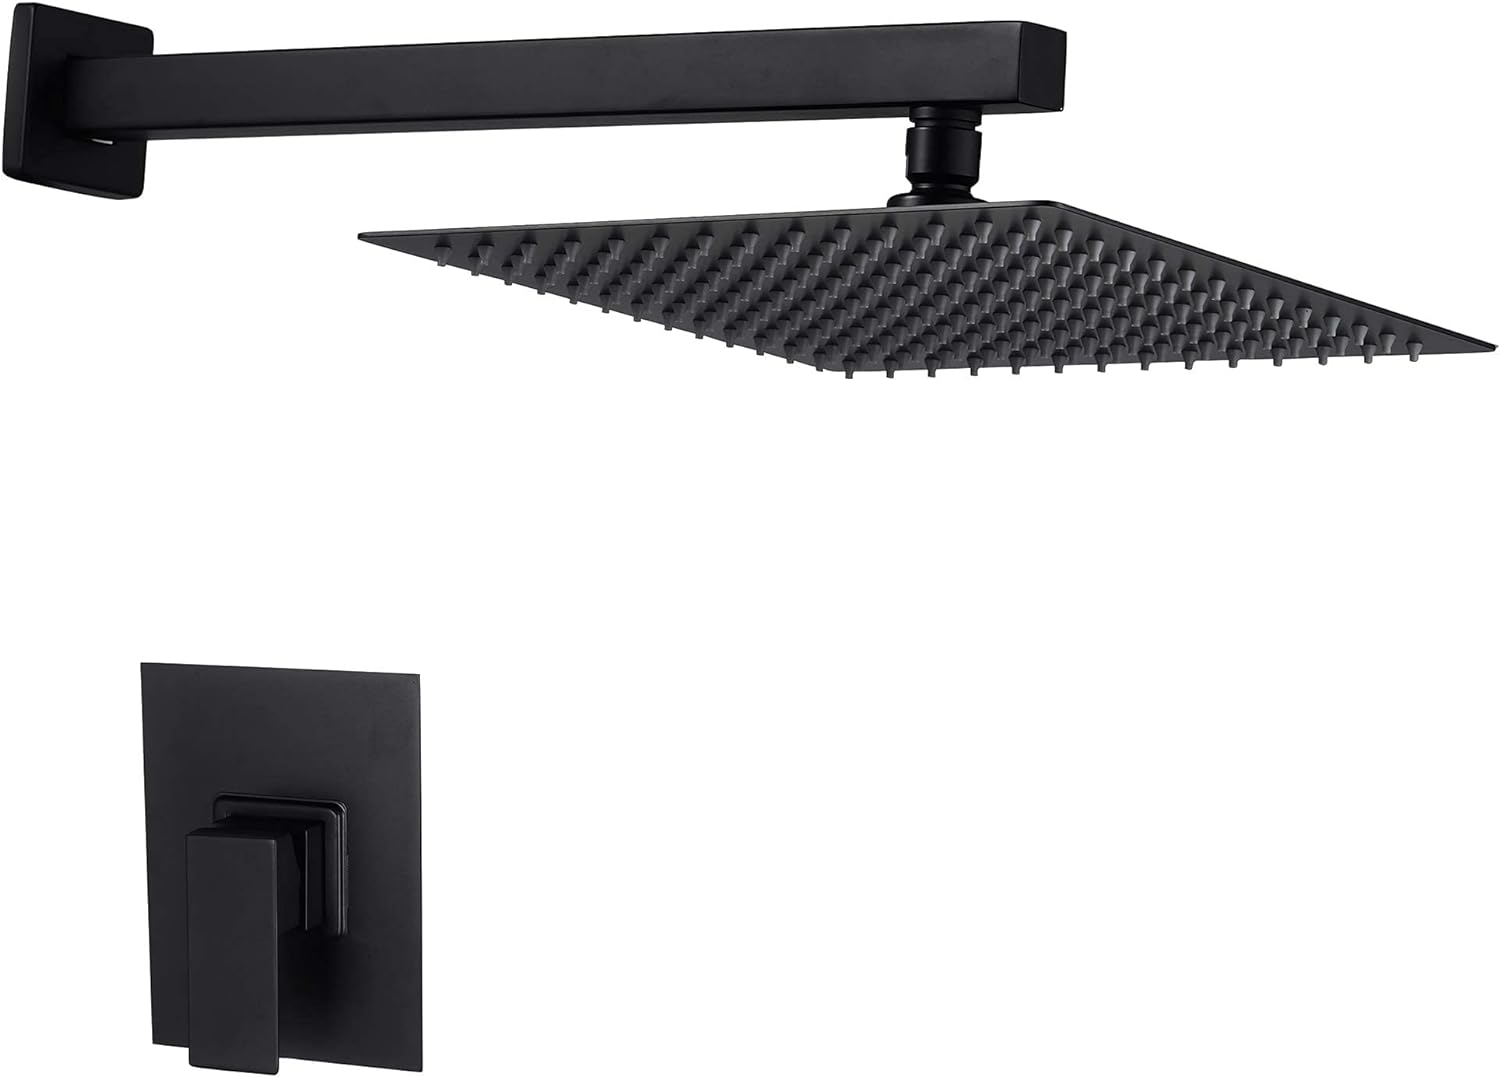 Lordear High Pressure Shower System Black 12 Inch Rainfall Shower System Bathroom Shower Faucet Pressure Balance Matte Black Wall Mount Square Shower Head Combo Including Rough-In Valve Body and Trim | Shower Faucets & System | Lordear